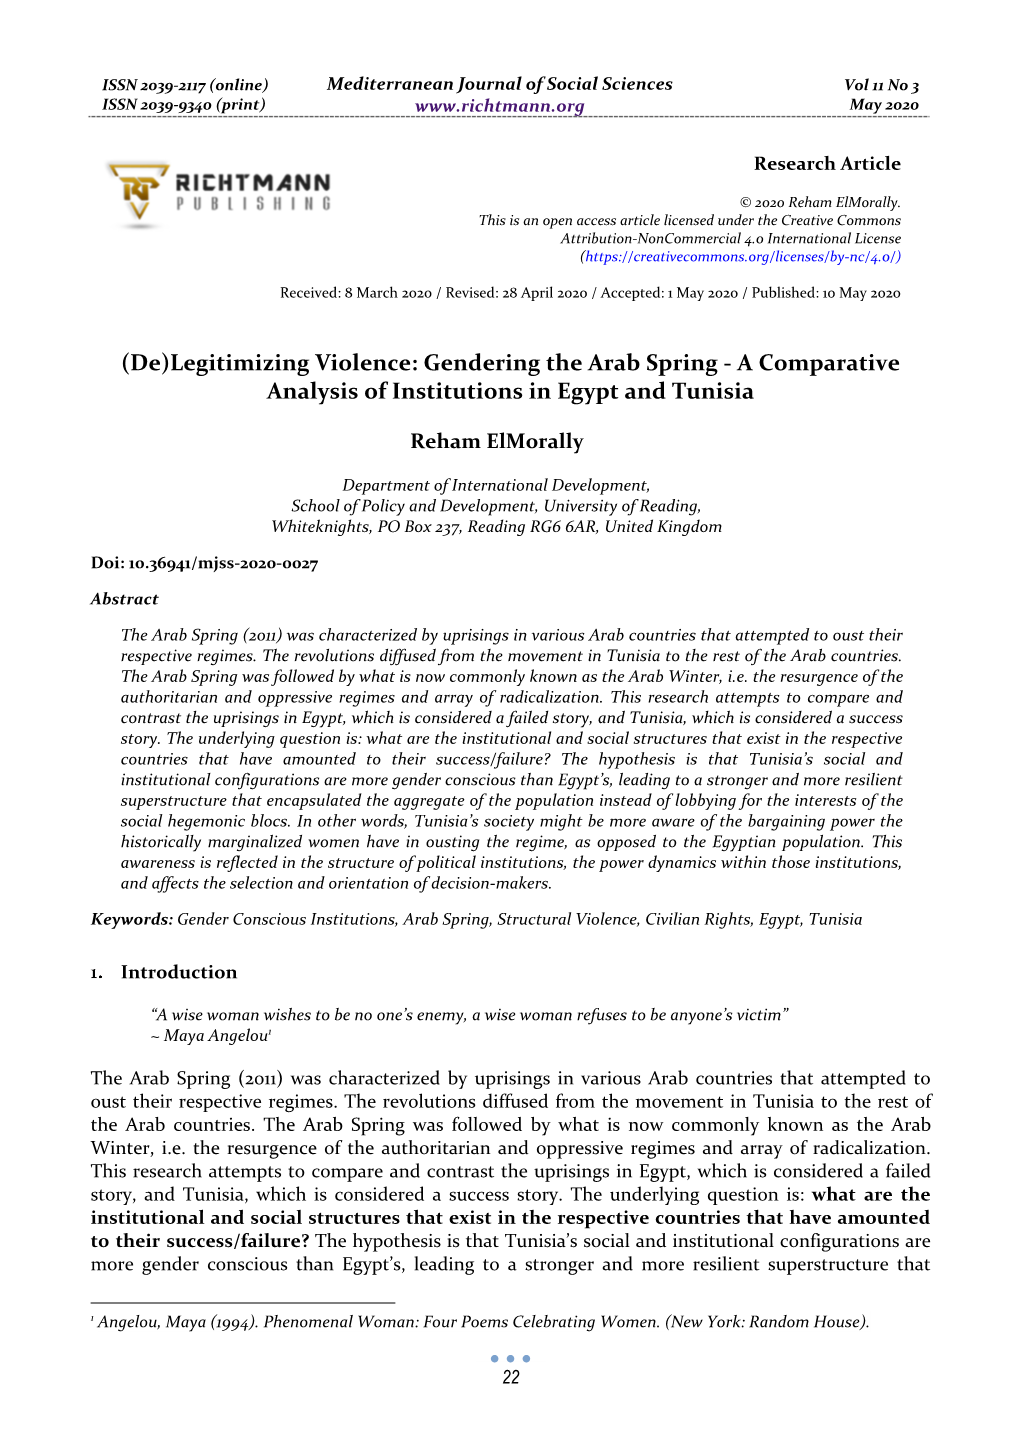 (De)Legitimizing Violence: Gendering the Arab Spring - a Comparative Analysis of Institutions in Egypt and Tunisia